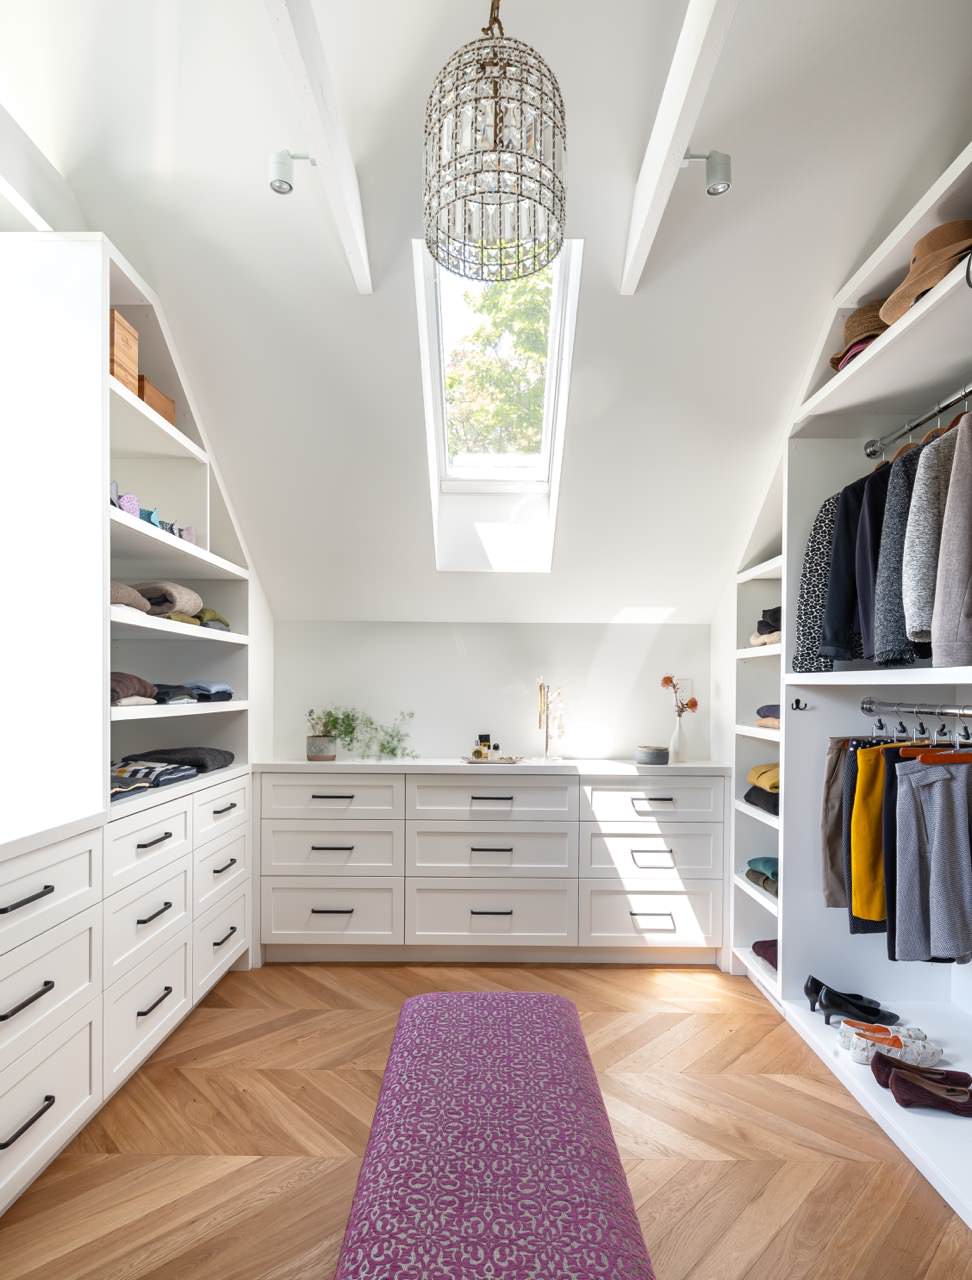 Stacked Wood and Metal Shelves in Walk In Closet - Transitional - Closet